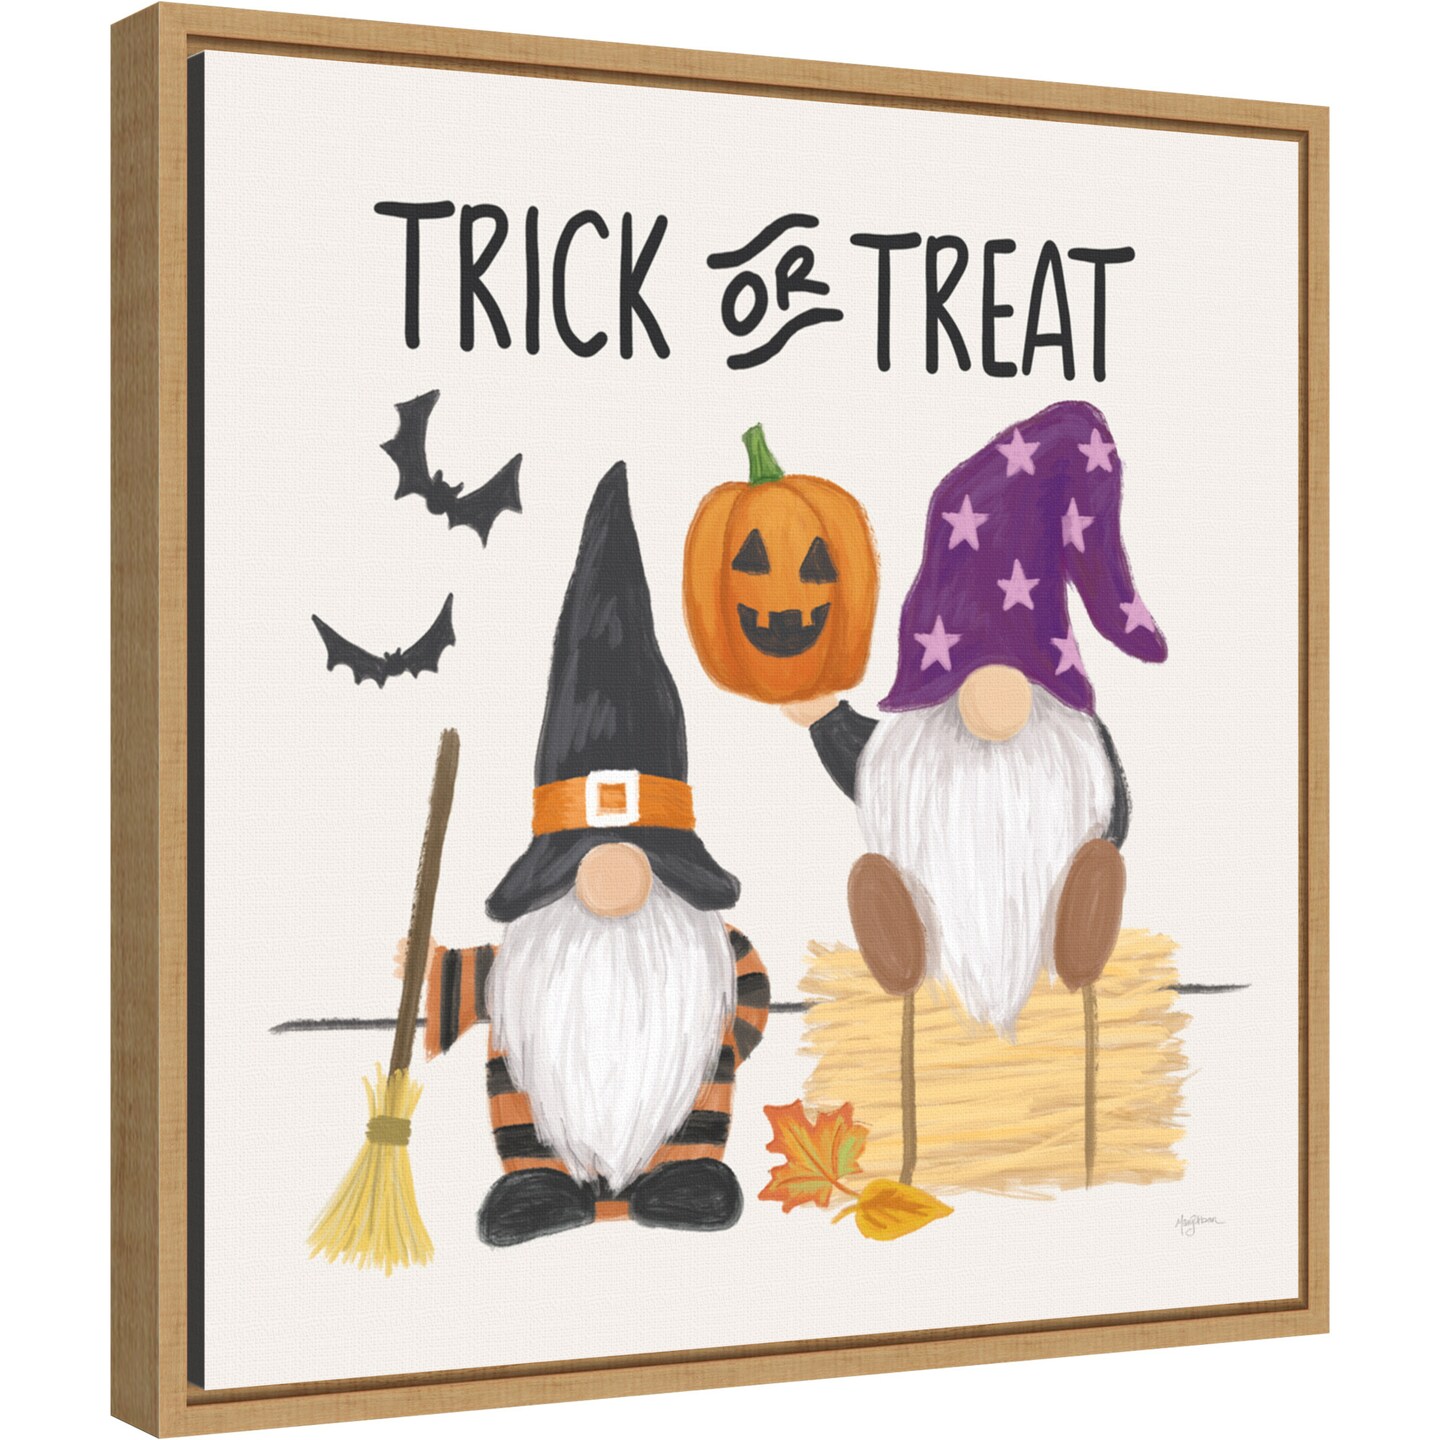 Halloween Gnomes III by Mary Urban 16-in. W x 16-in. H. Canvas Wall Art Print Framed in Natural